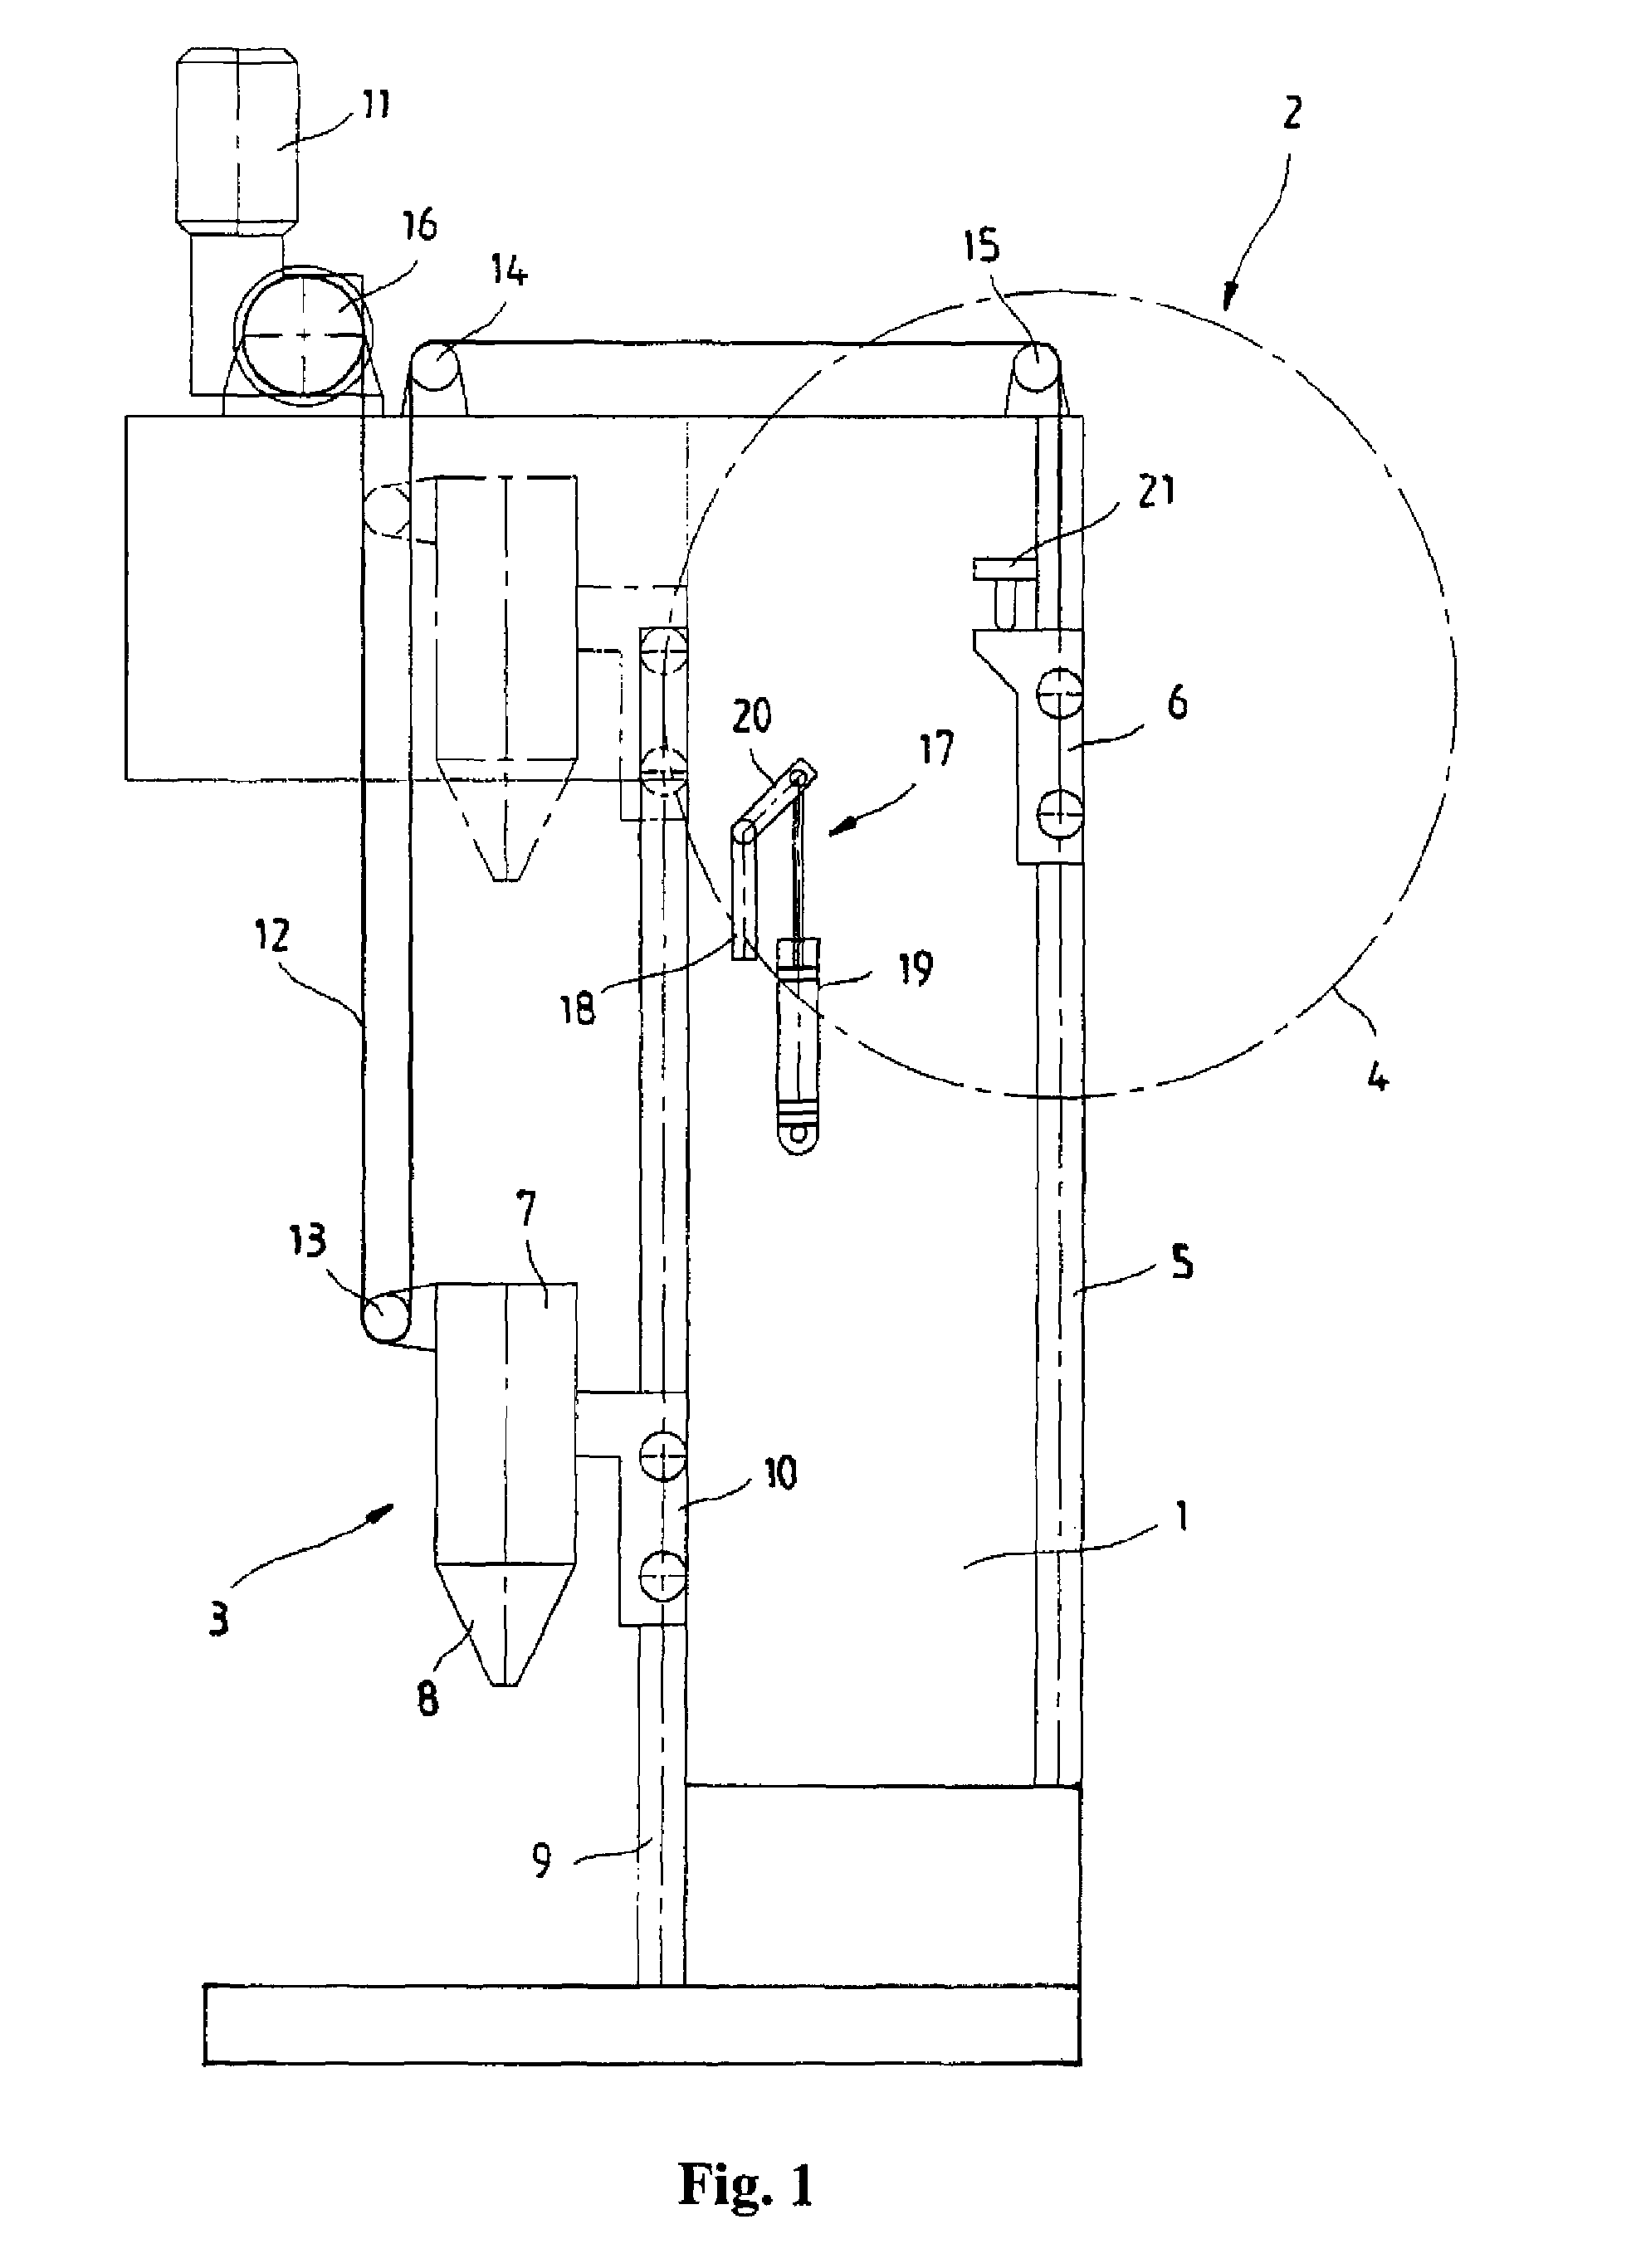 Vehicle wash system comprising a plurality of treatment units